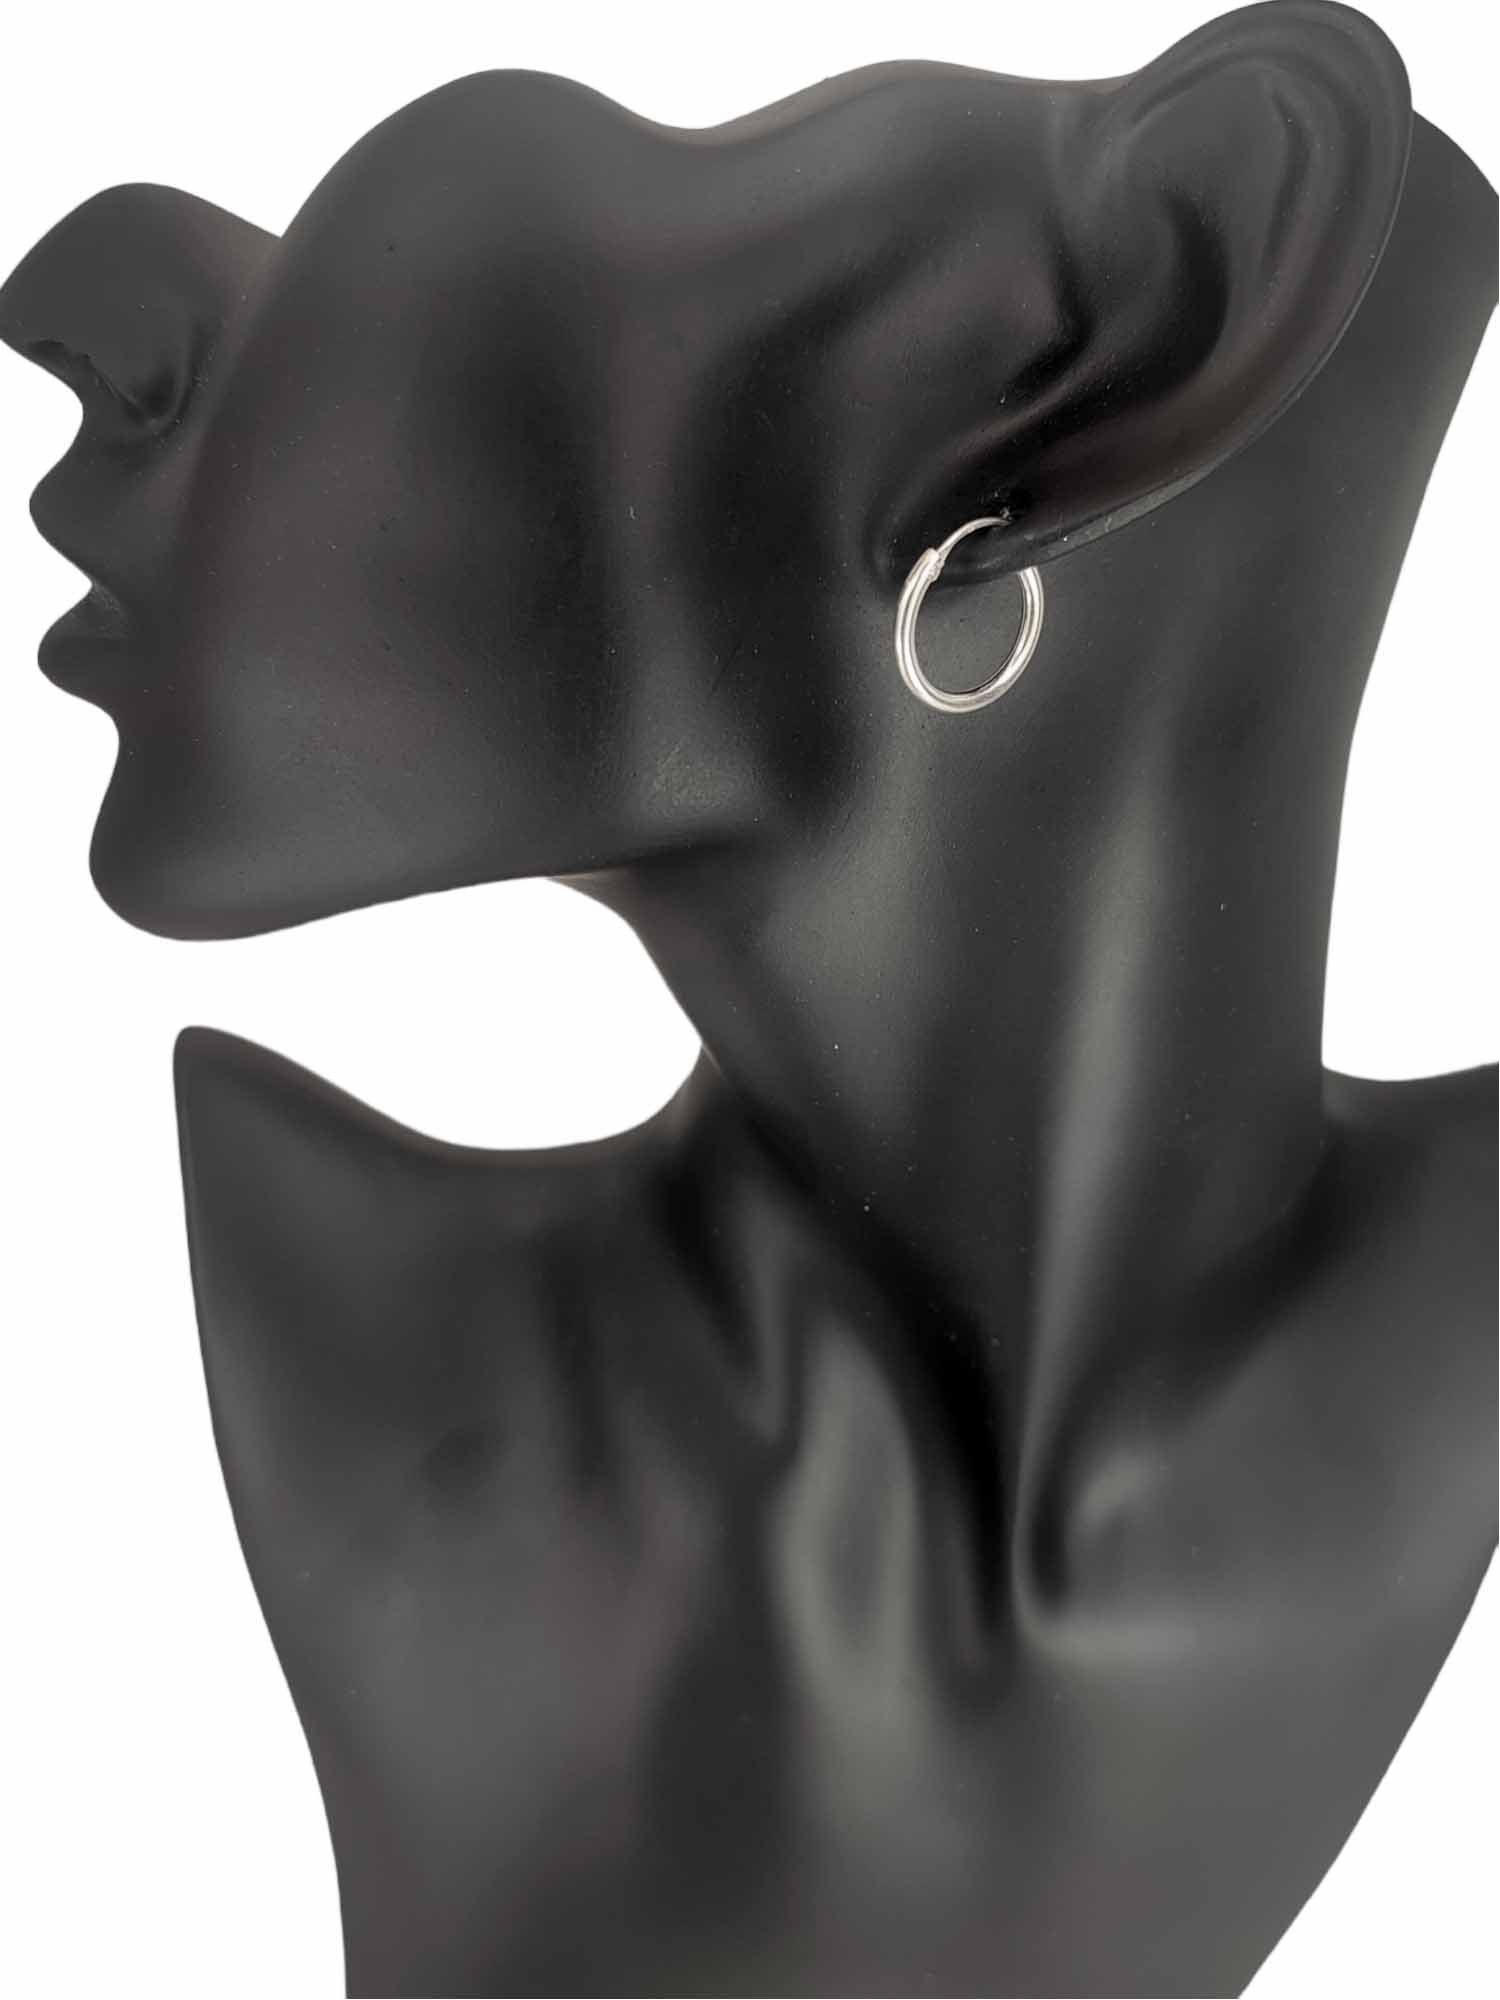 Kiss Ohr Kreole Leather of Ohrringe Paarpreis Schlicht Ohrring-Set Creole 925 Sterling Silber